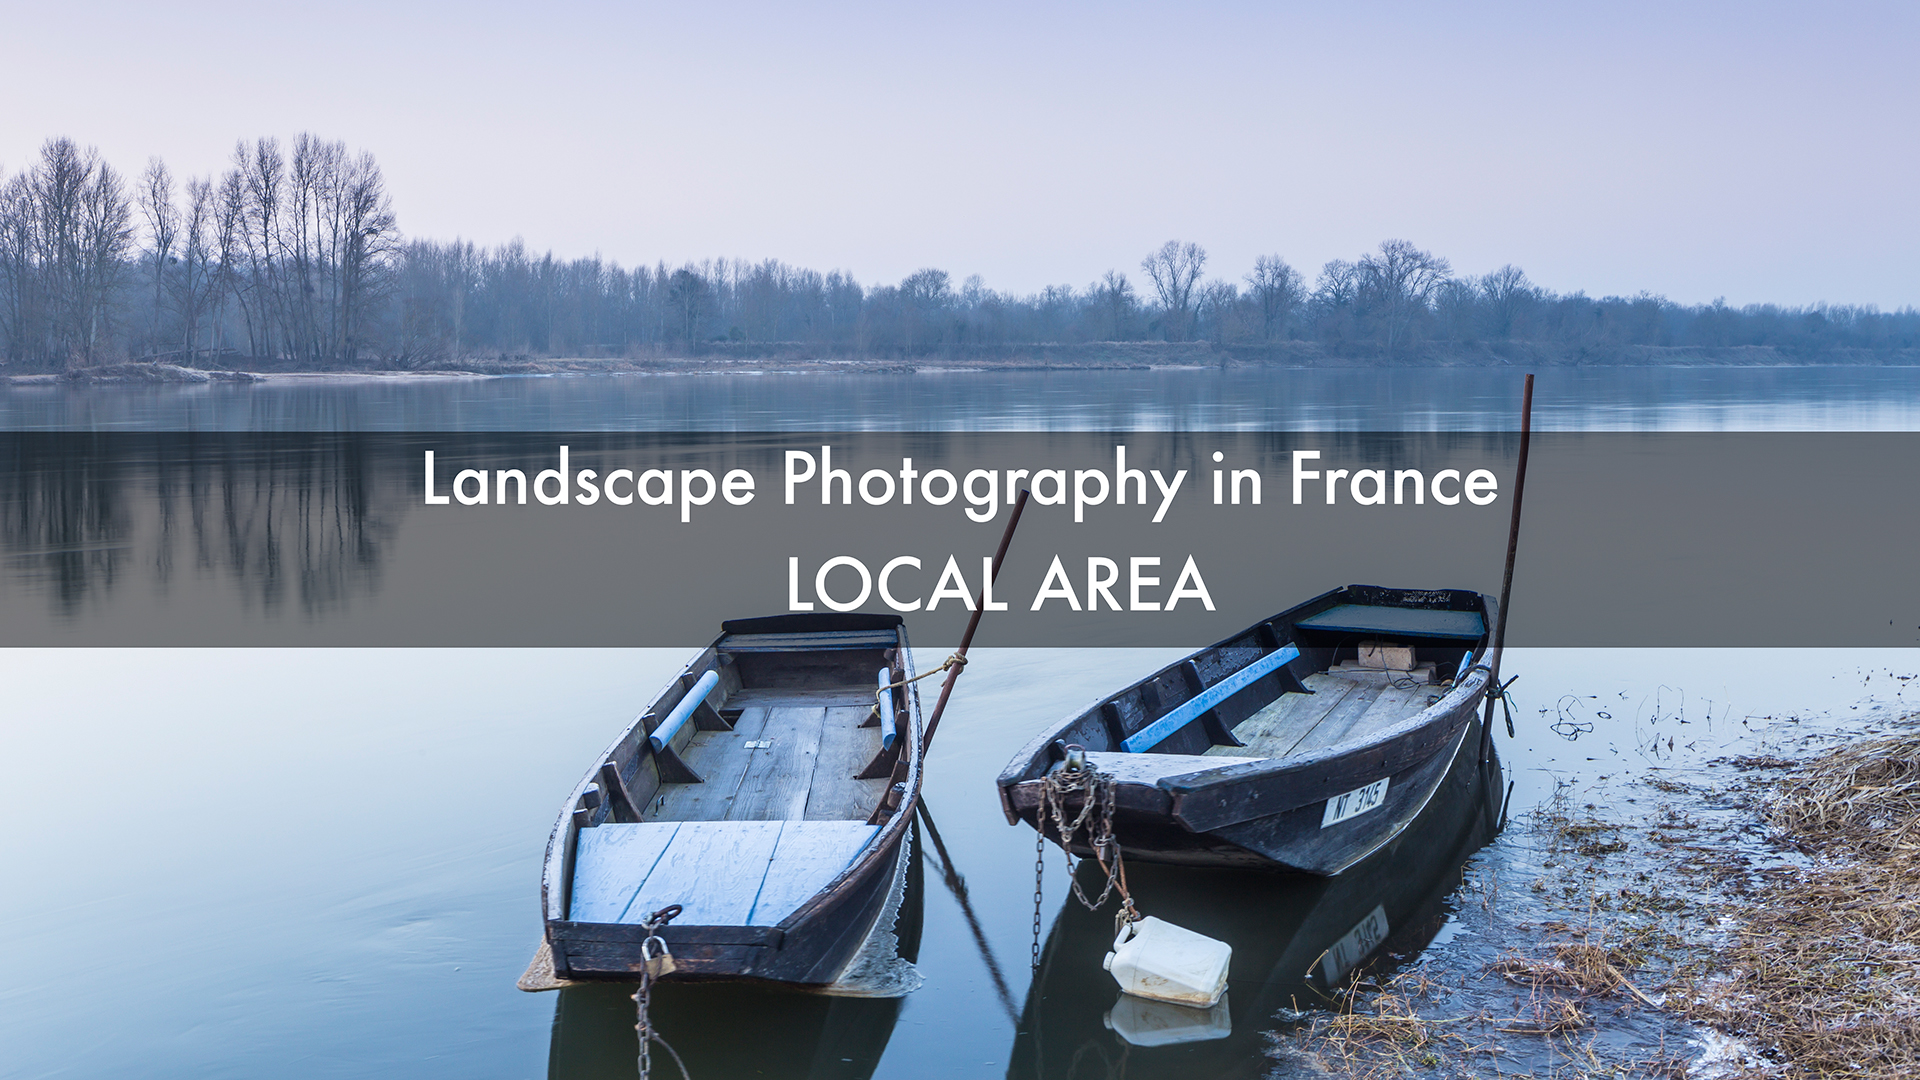 Landscape Photography in France. Local Area.